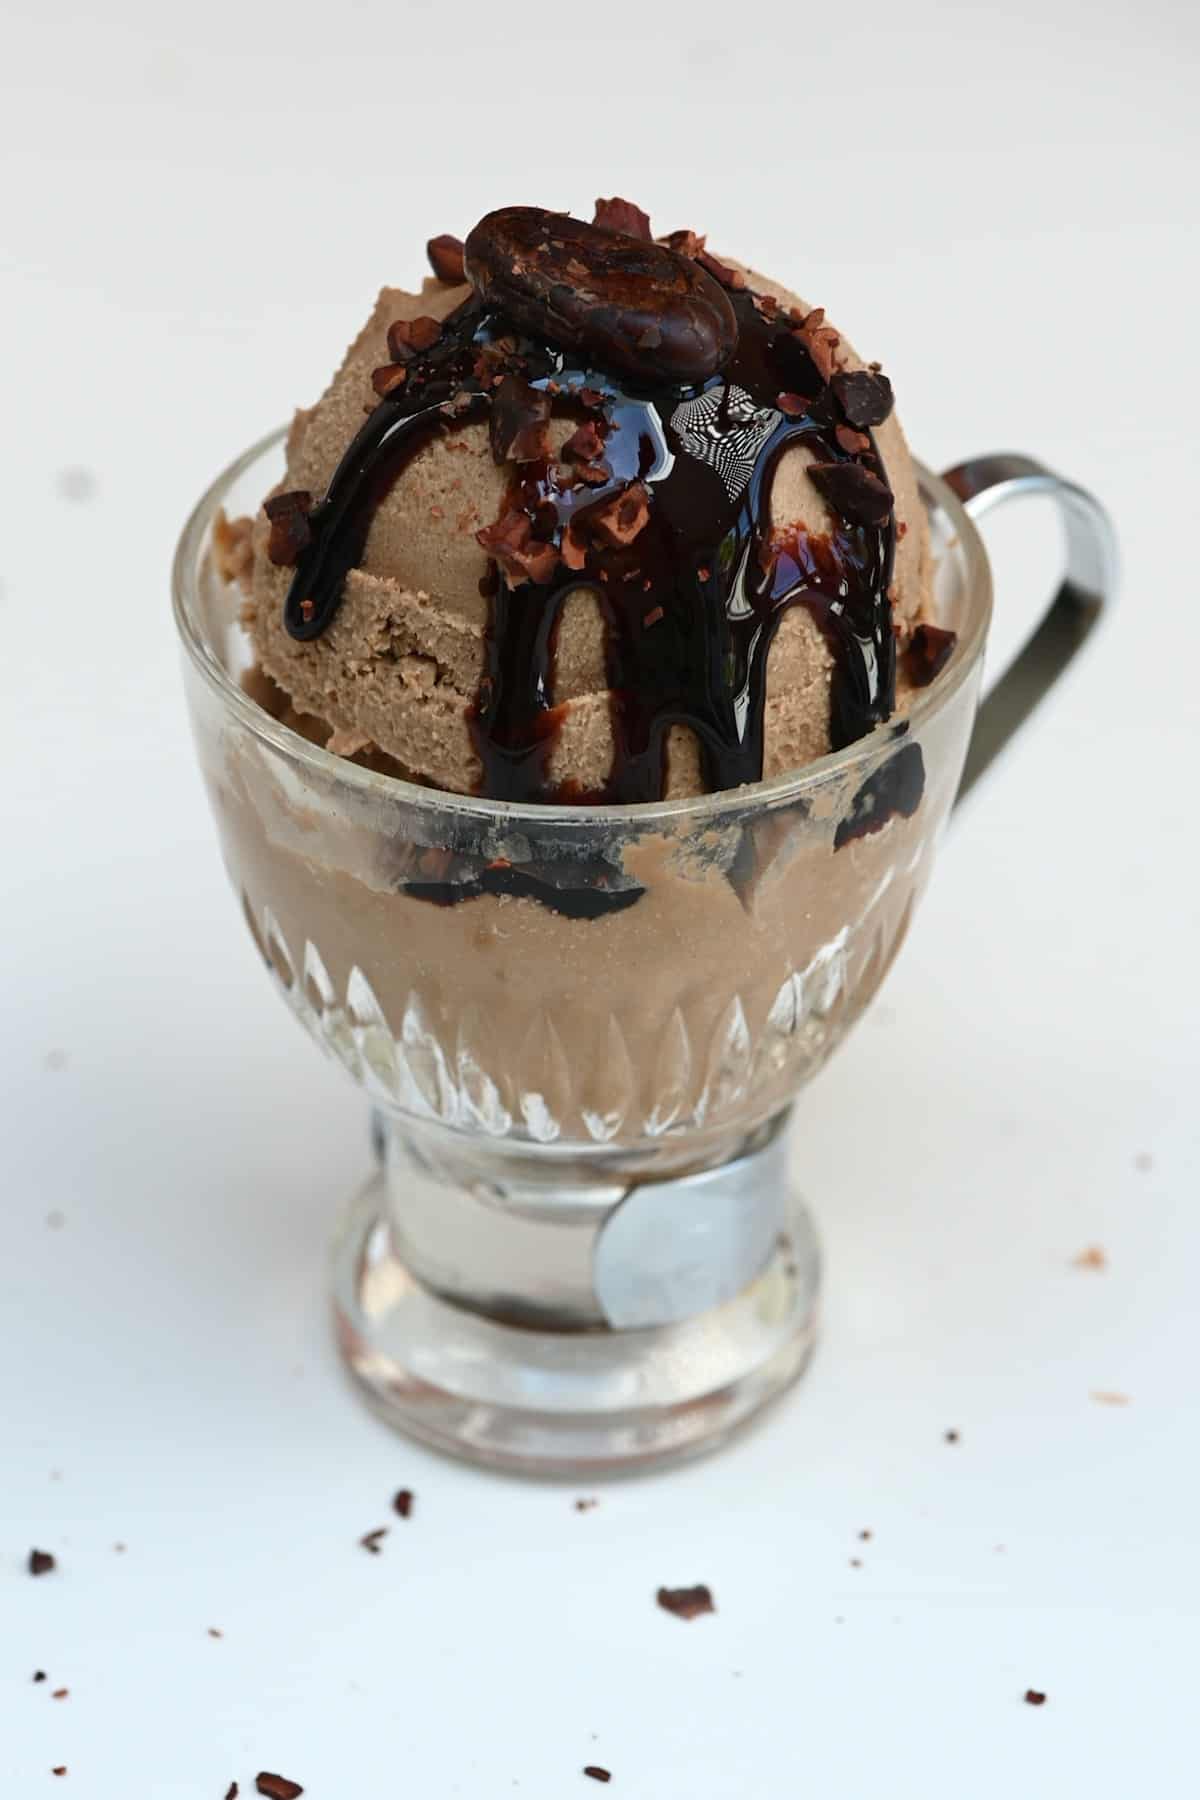 A serving of coffee ice cream